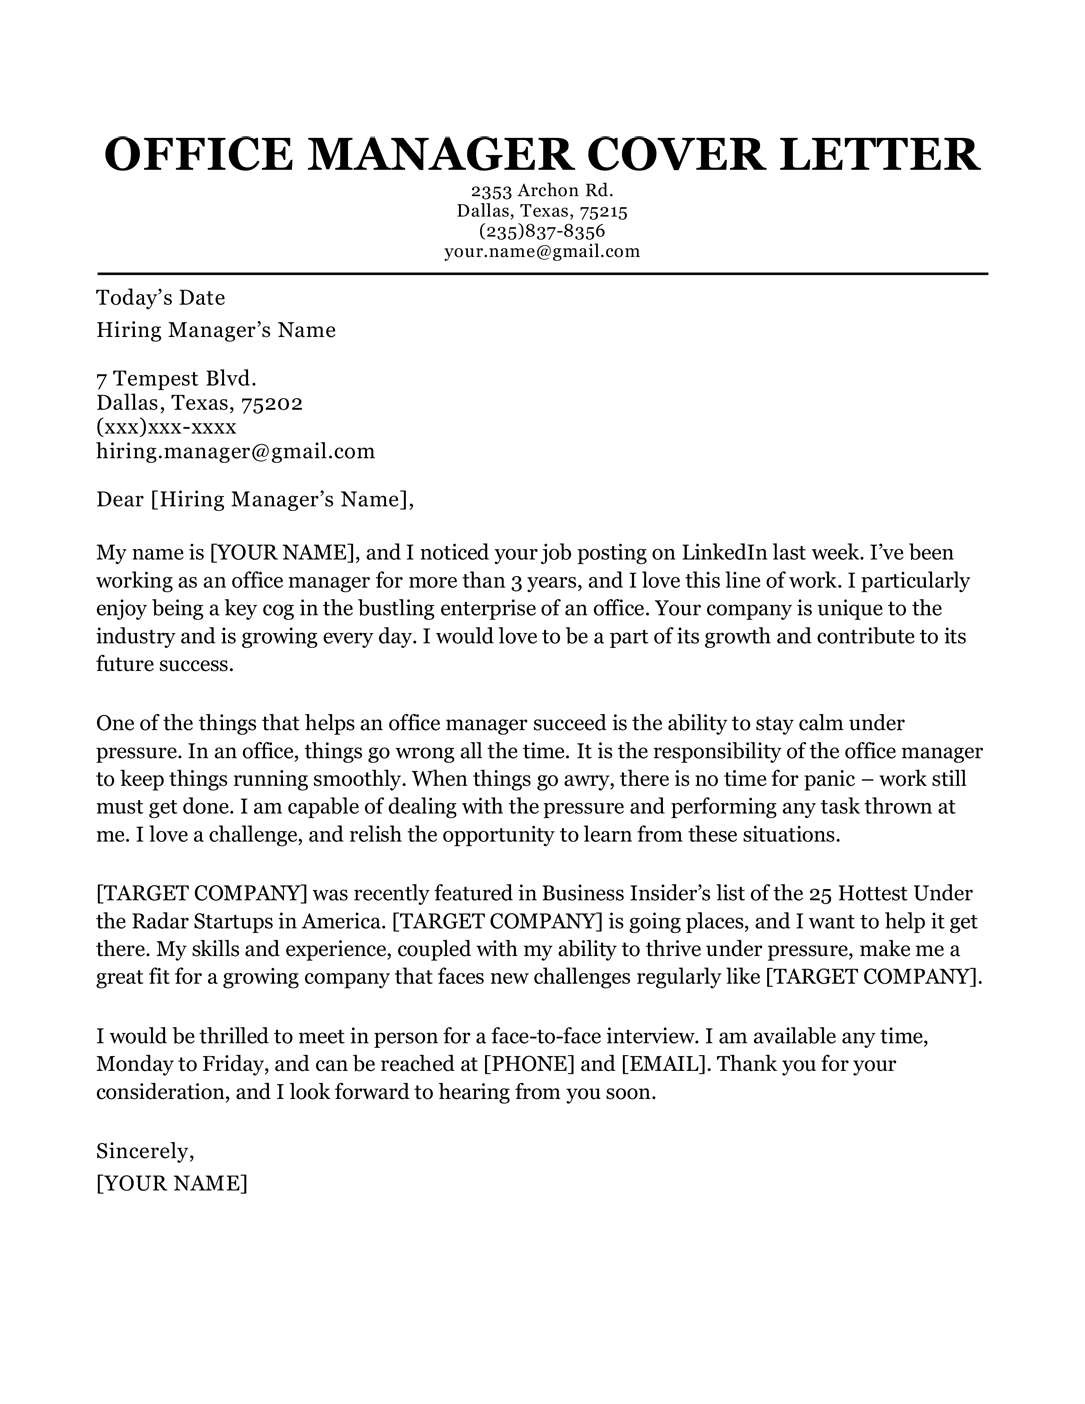 Office Manager Cover Letter Sample | Resume Companion